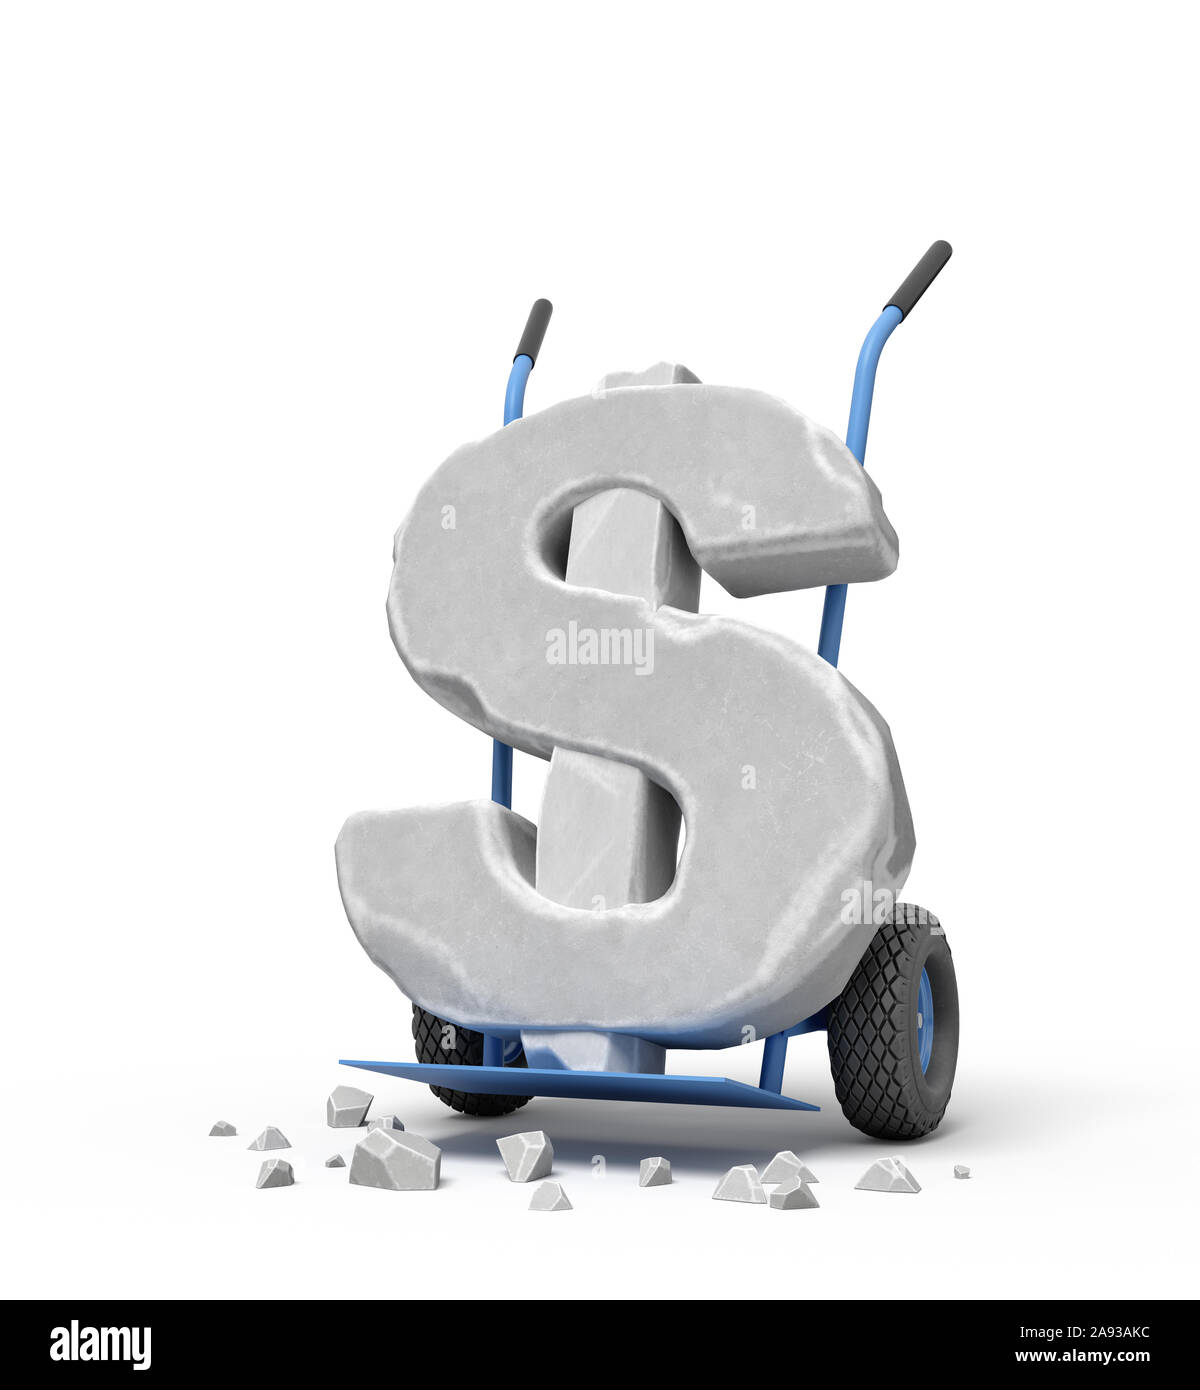 3d rendering of large stone dollar symbol on blue hand truck with big stone crumbs. Stock Photo